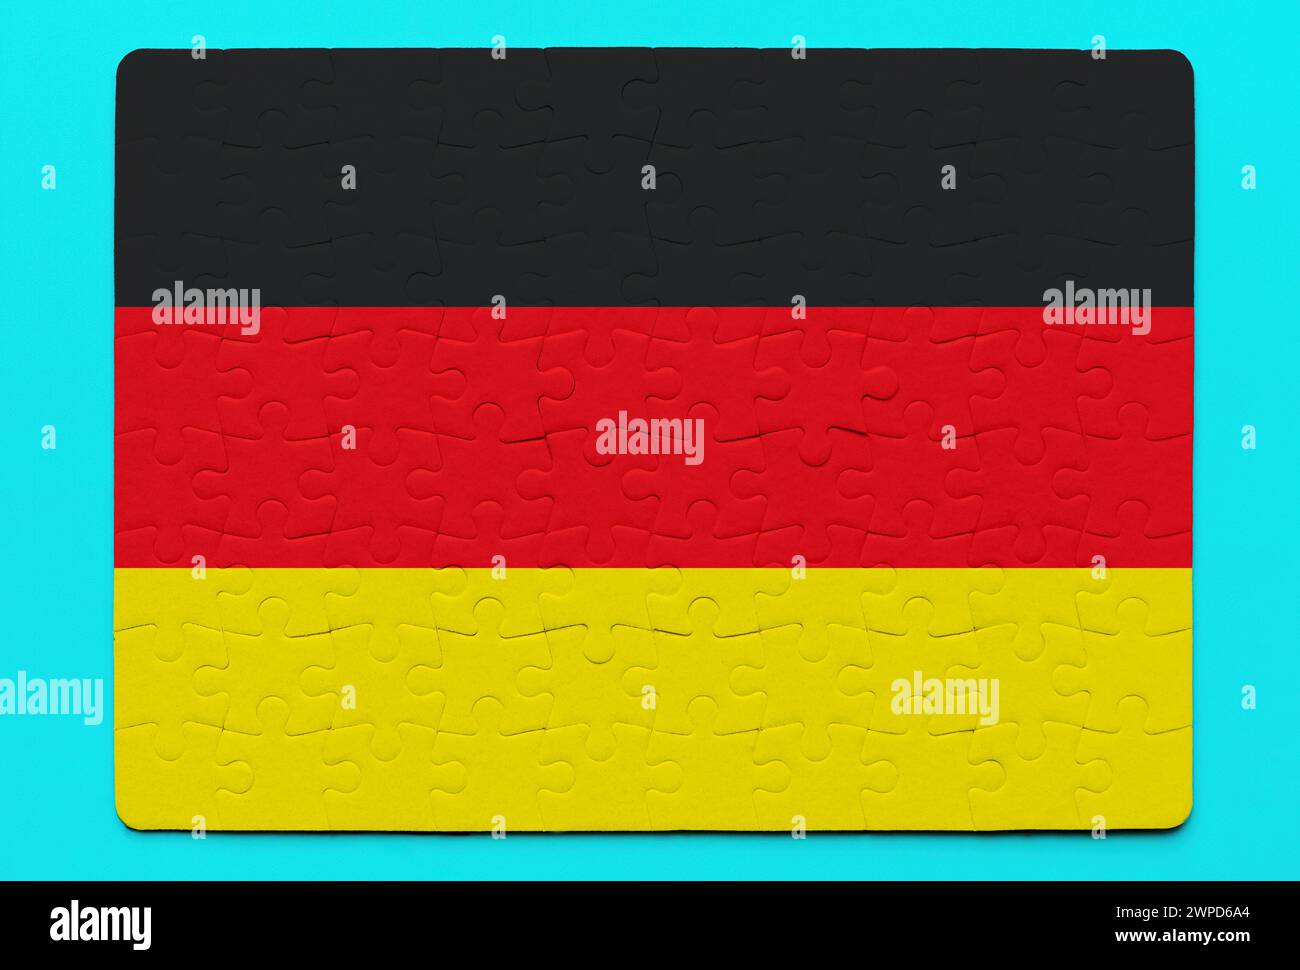 Assembled German flag jigsaw puzzle rests on a vibrant blue background. Unity, nationalism and problem-solving related concept. Stock Photo